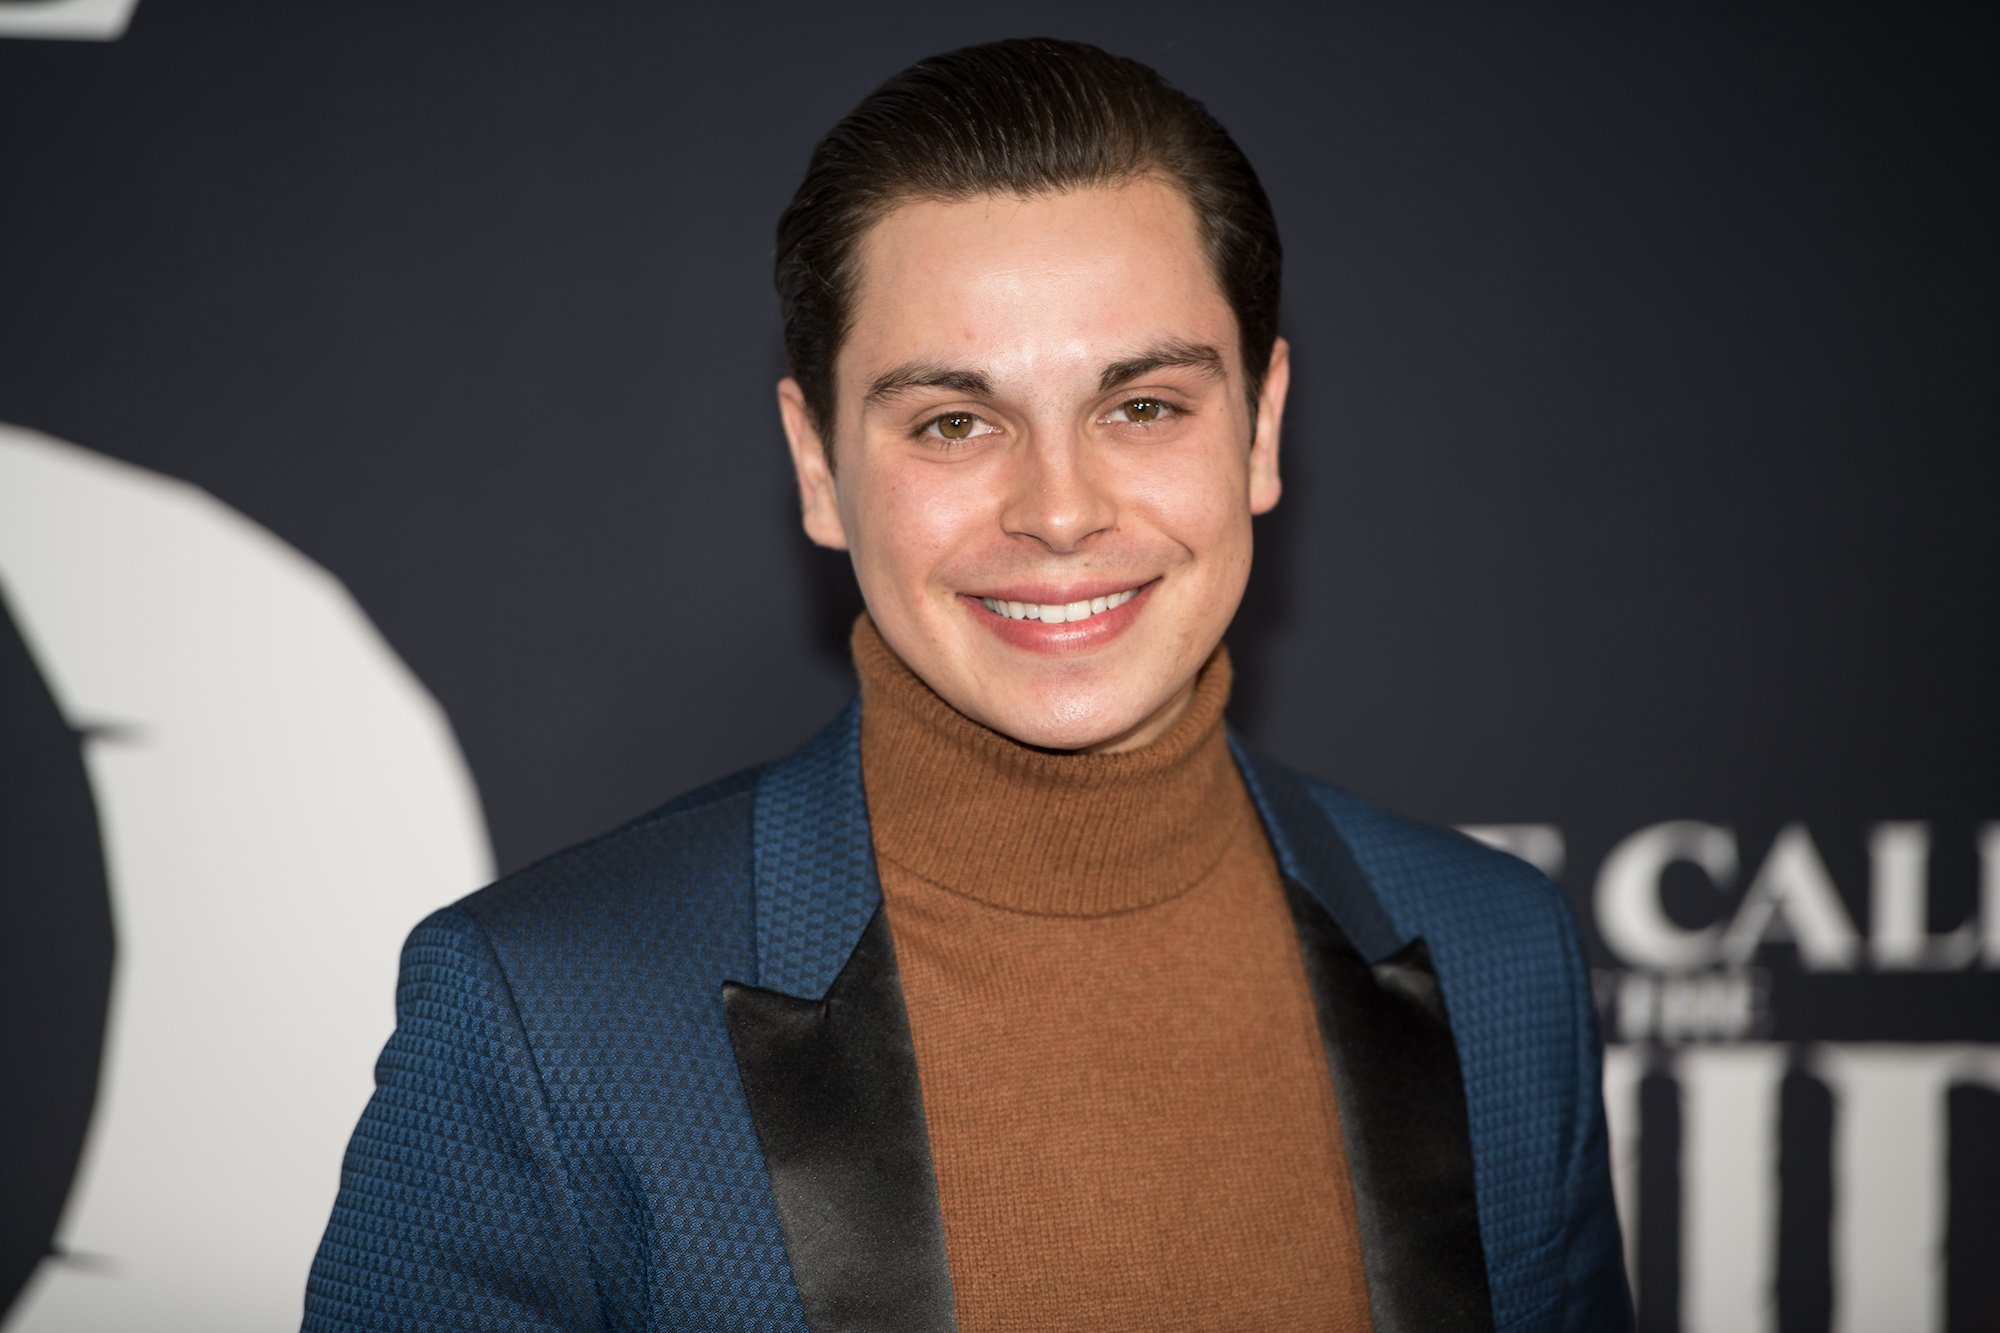 Jake T. Austin smiling in front of a black background